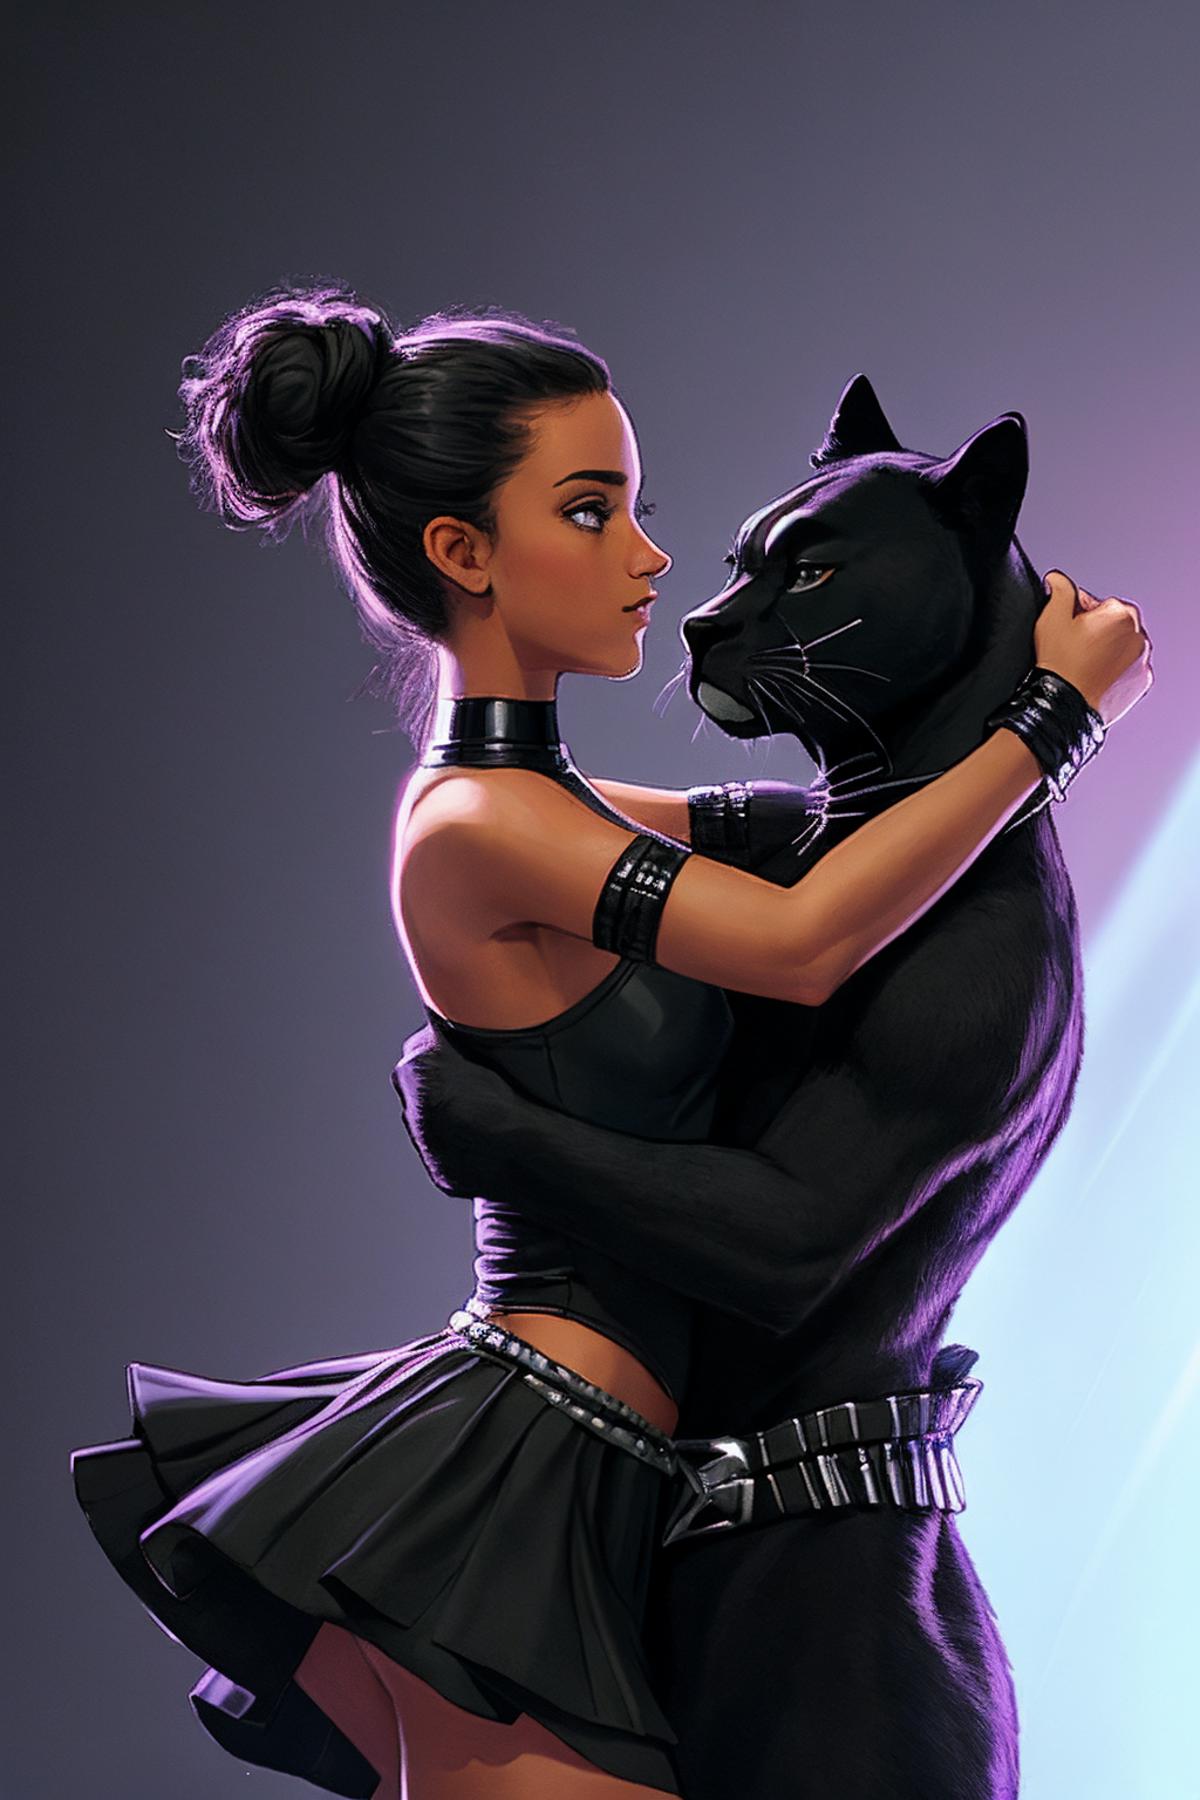 A woman wearing a black top and black skirt is holding a black cat.